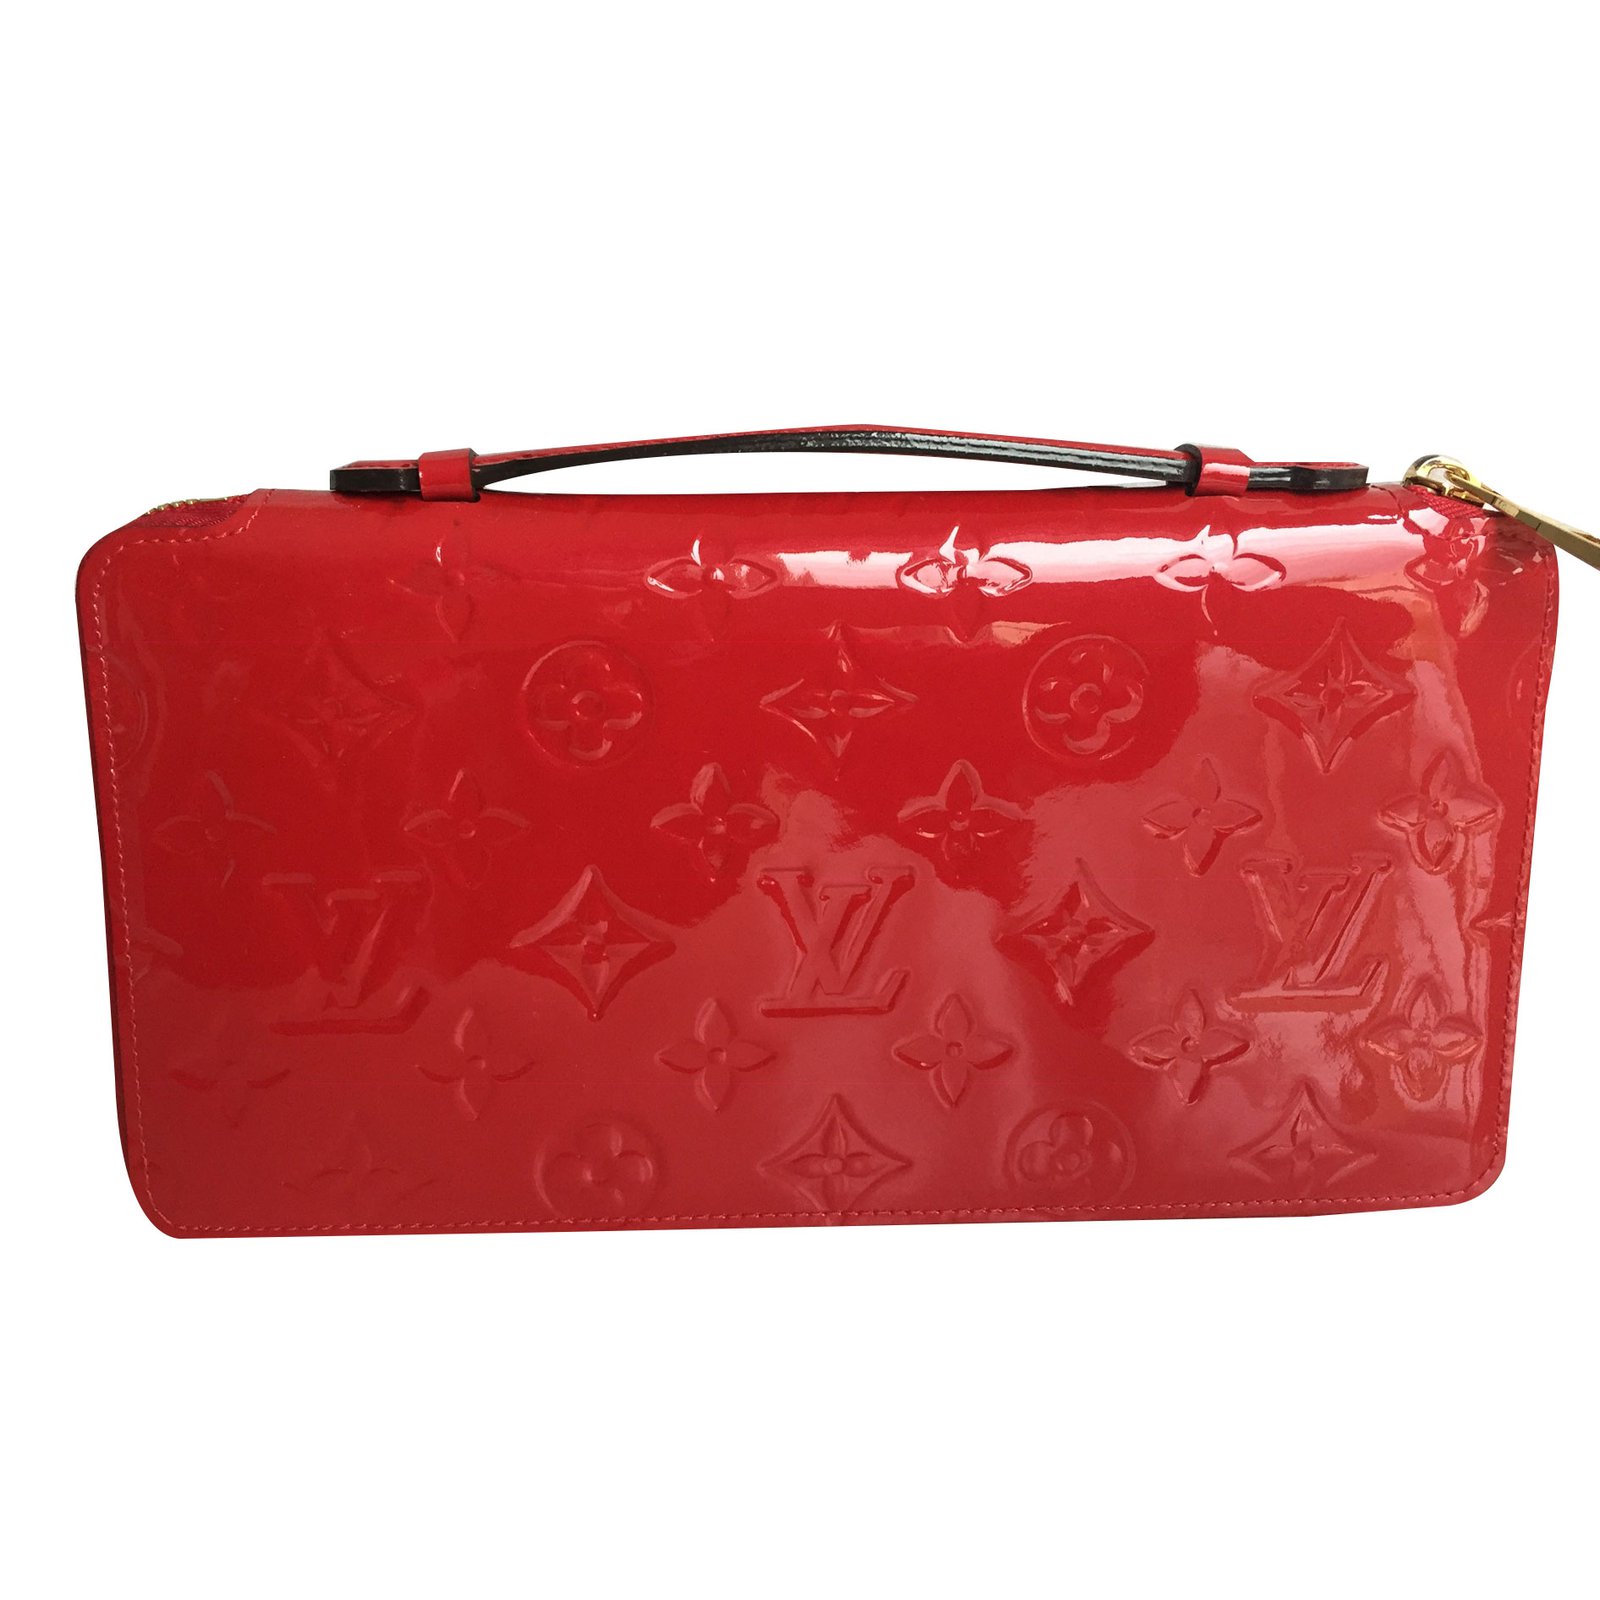 Louis Vuitton Purse With Red Handle